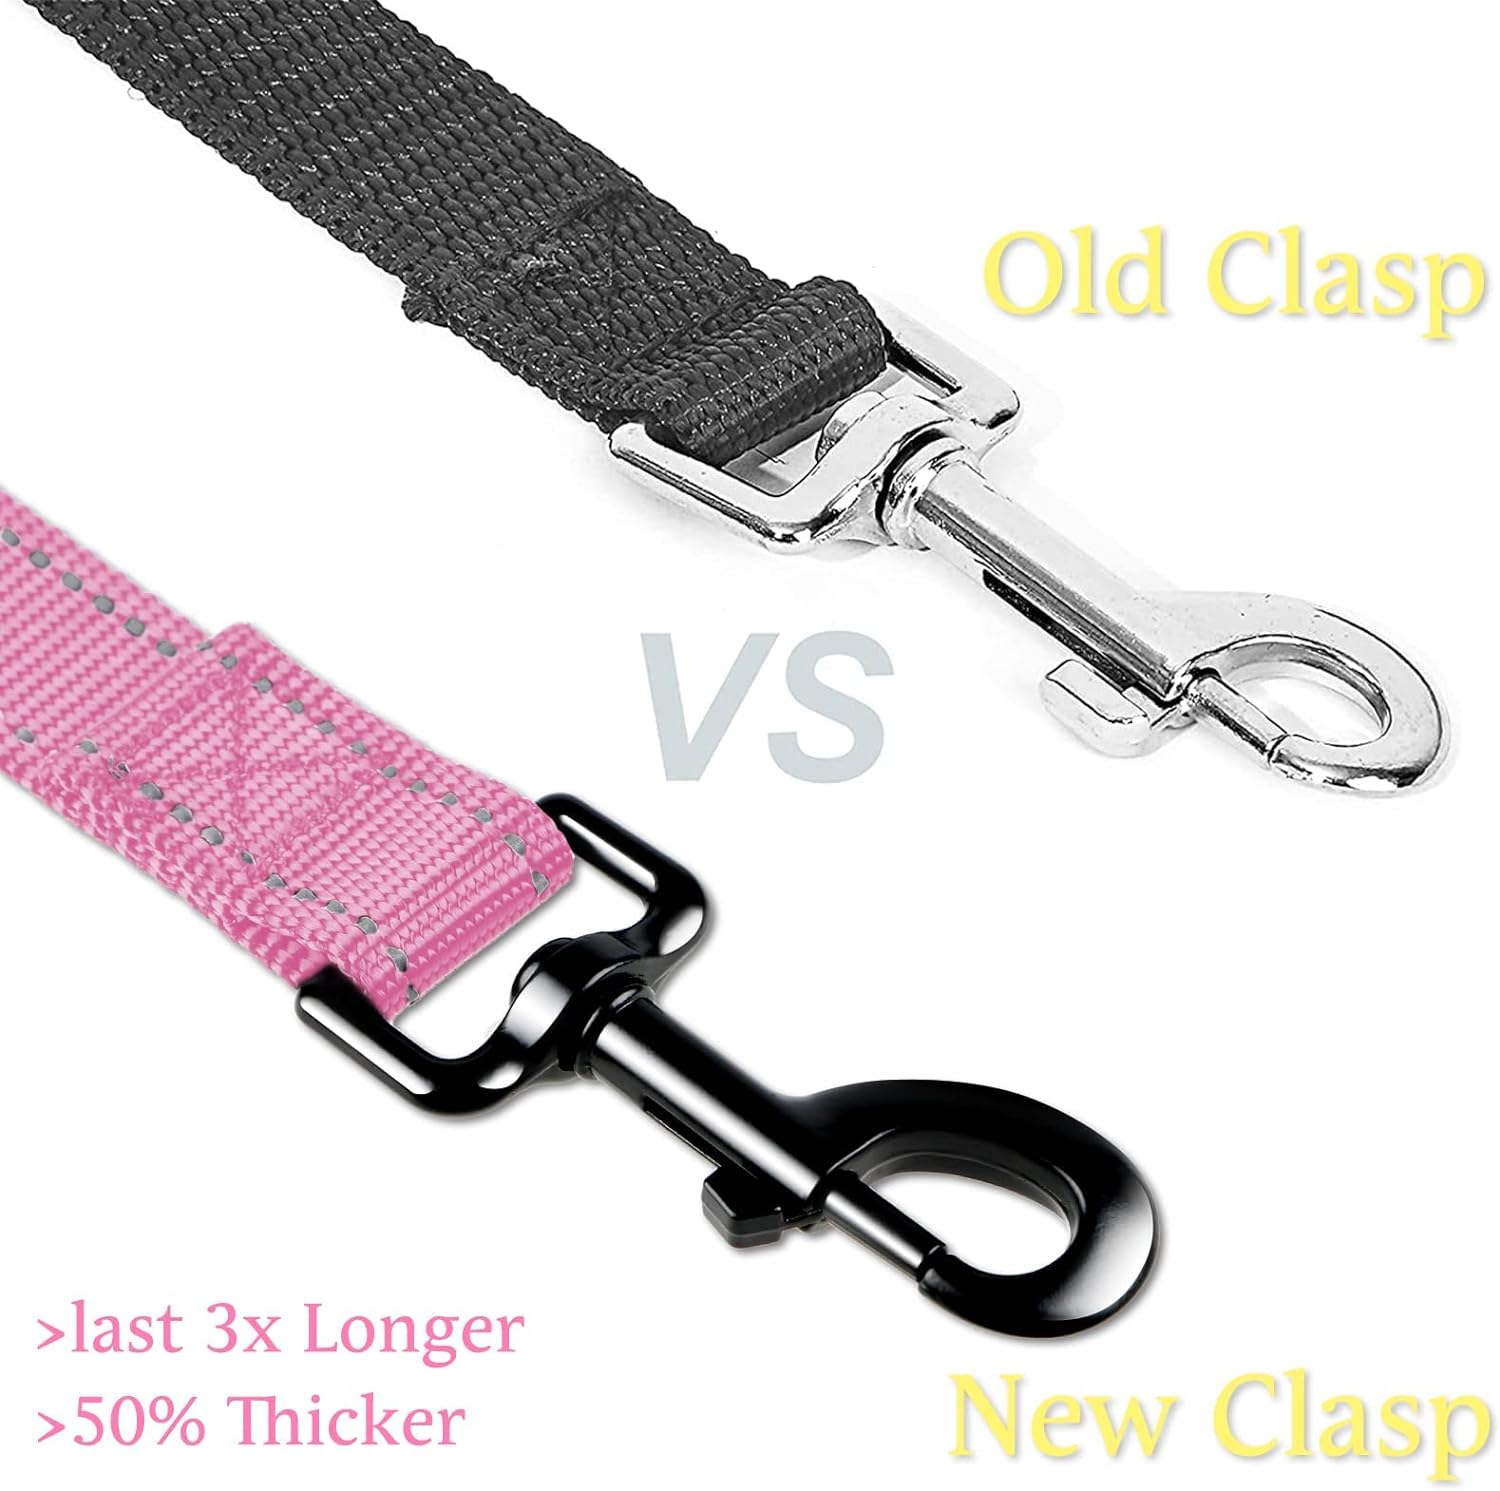 DPOEGTS Long Leash for Dog Training: The Perfect Tool for Obedience and Recall Training